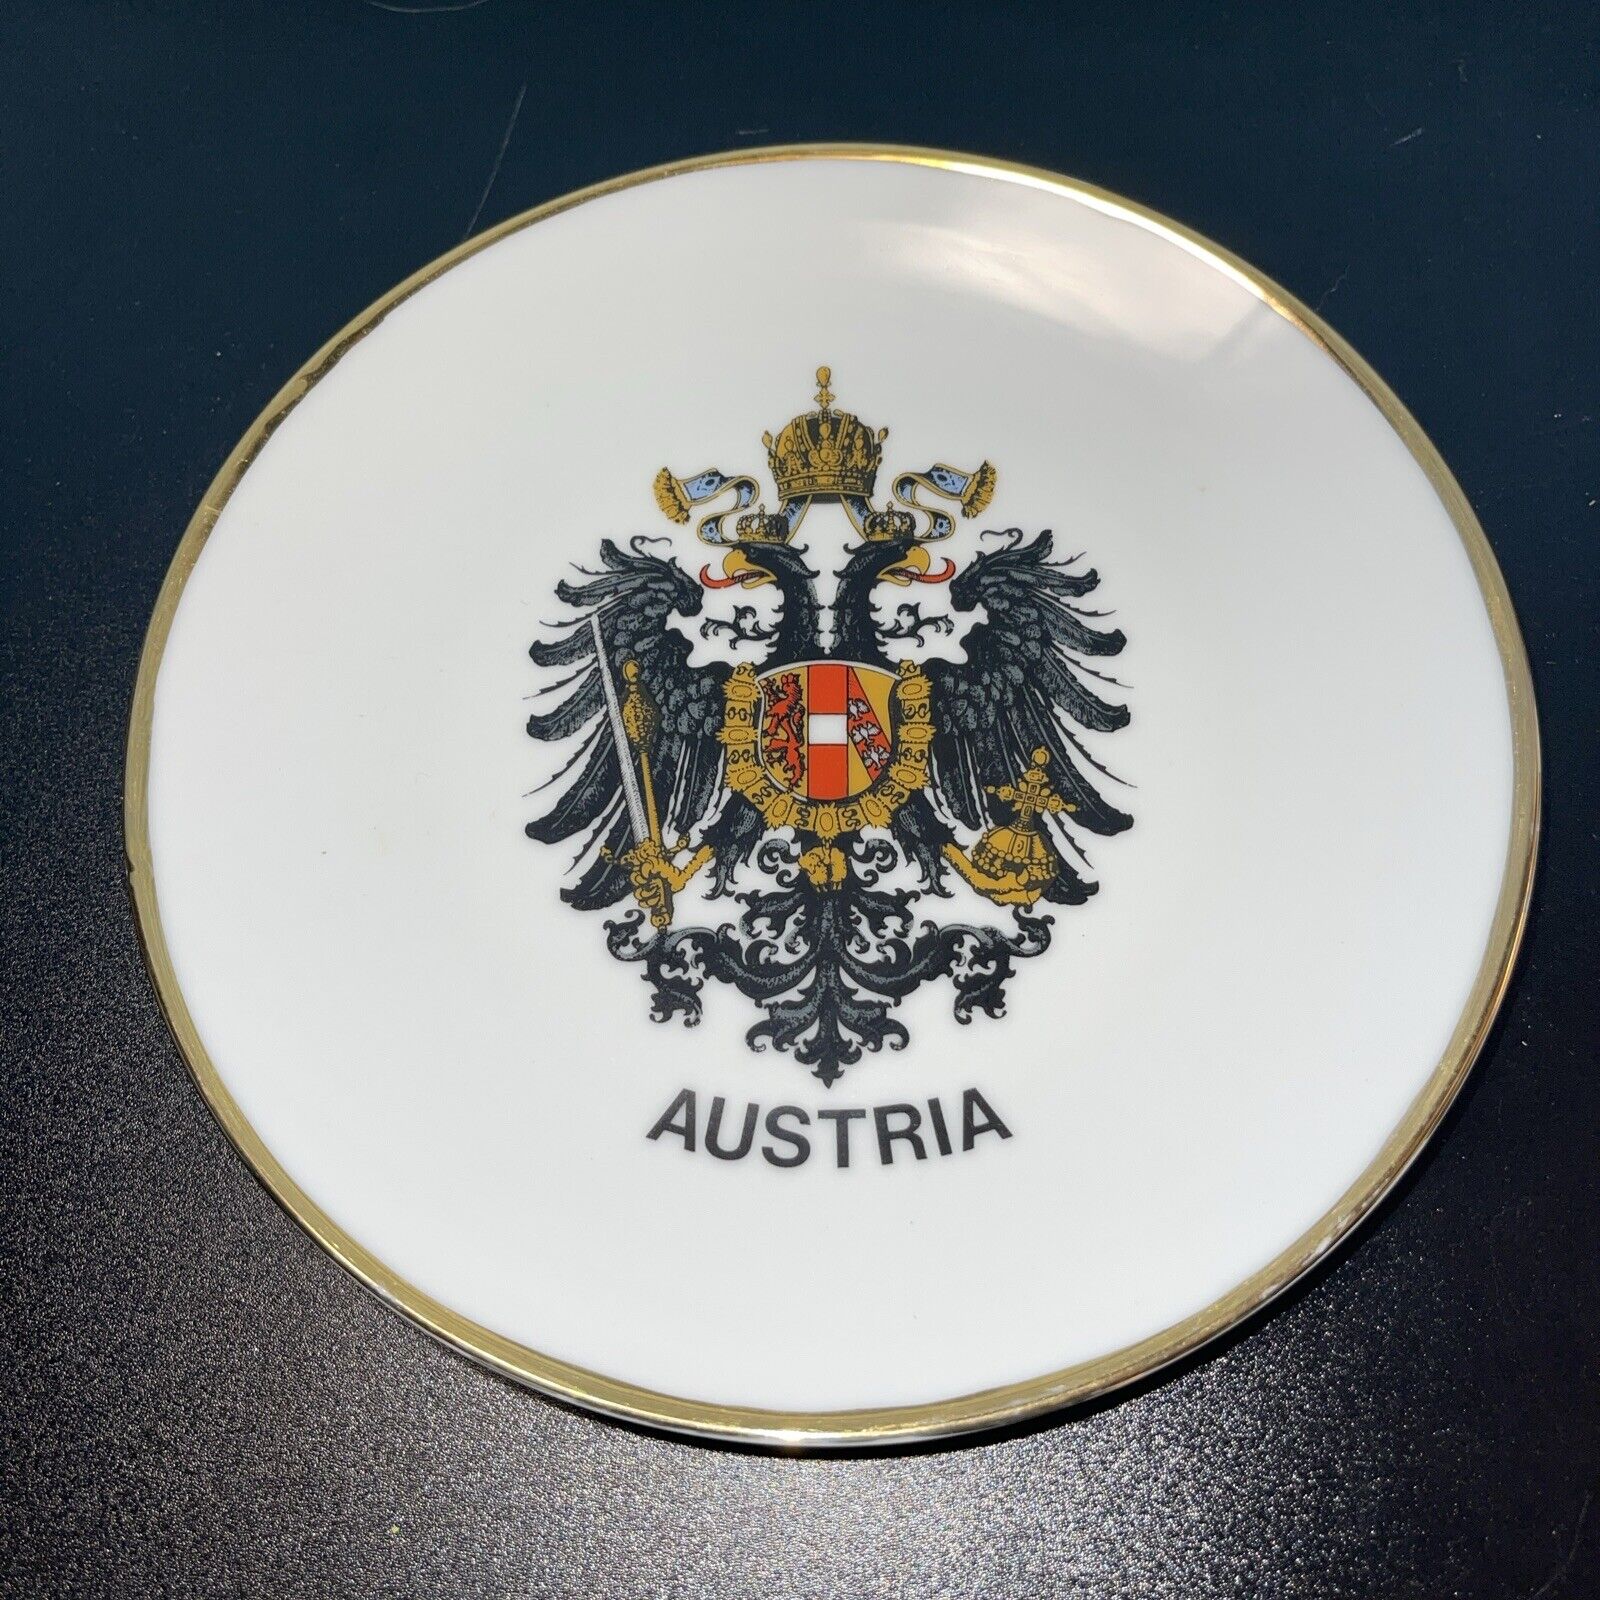 AUSTRIAN WALL PLATE SOUVENIR OF AUSTRIA WITH COAT OF ARMS (7.5 Inch)